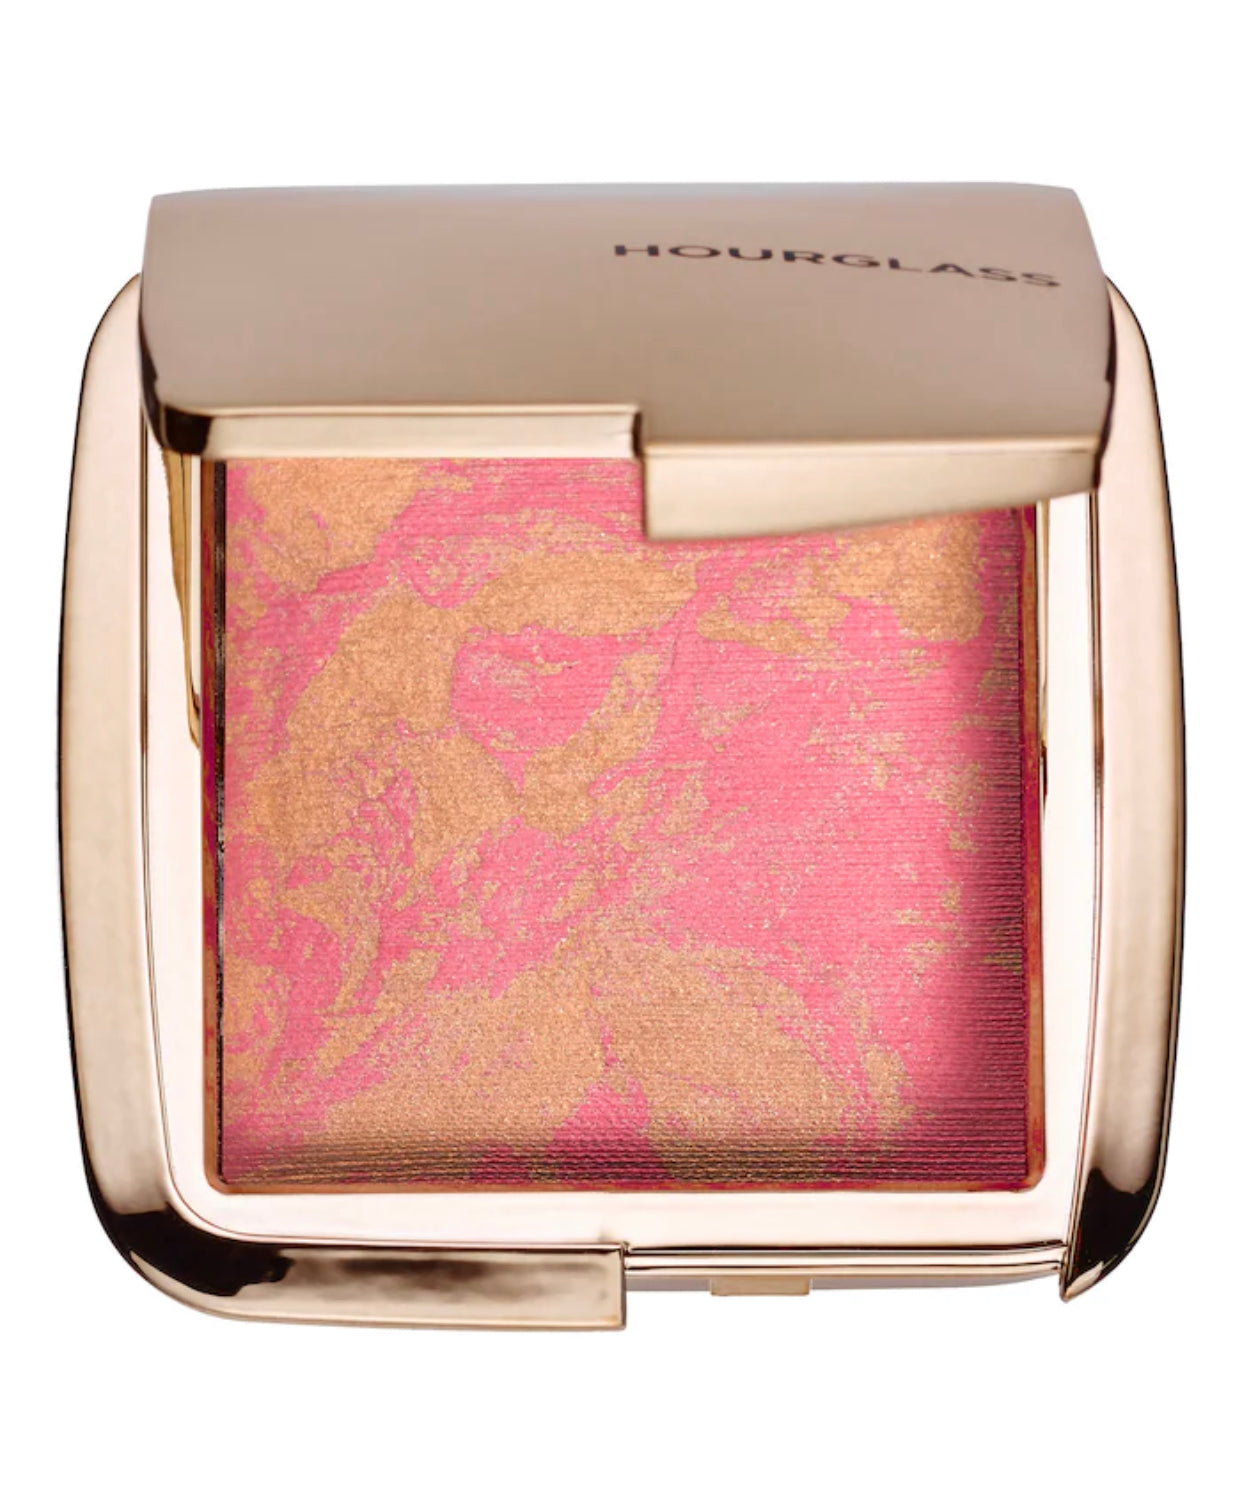 HOURGLASS, AMBIENT LIGHTING BLUSH COLLECTION